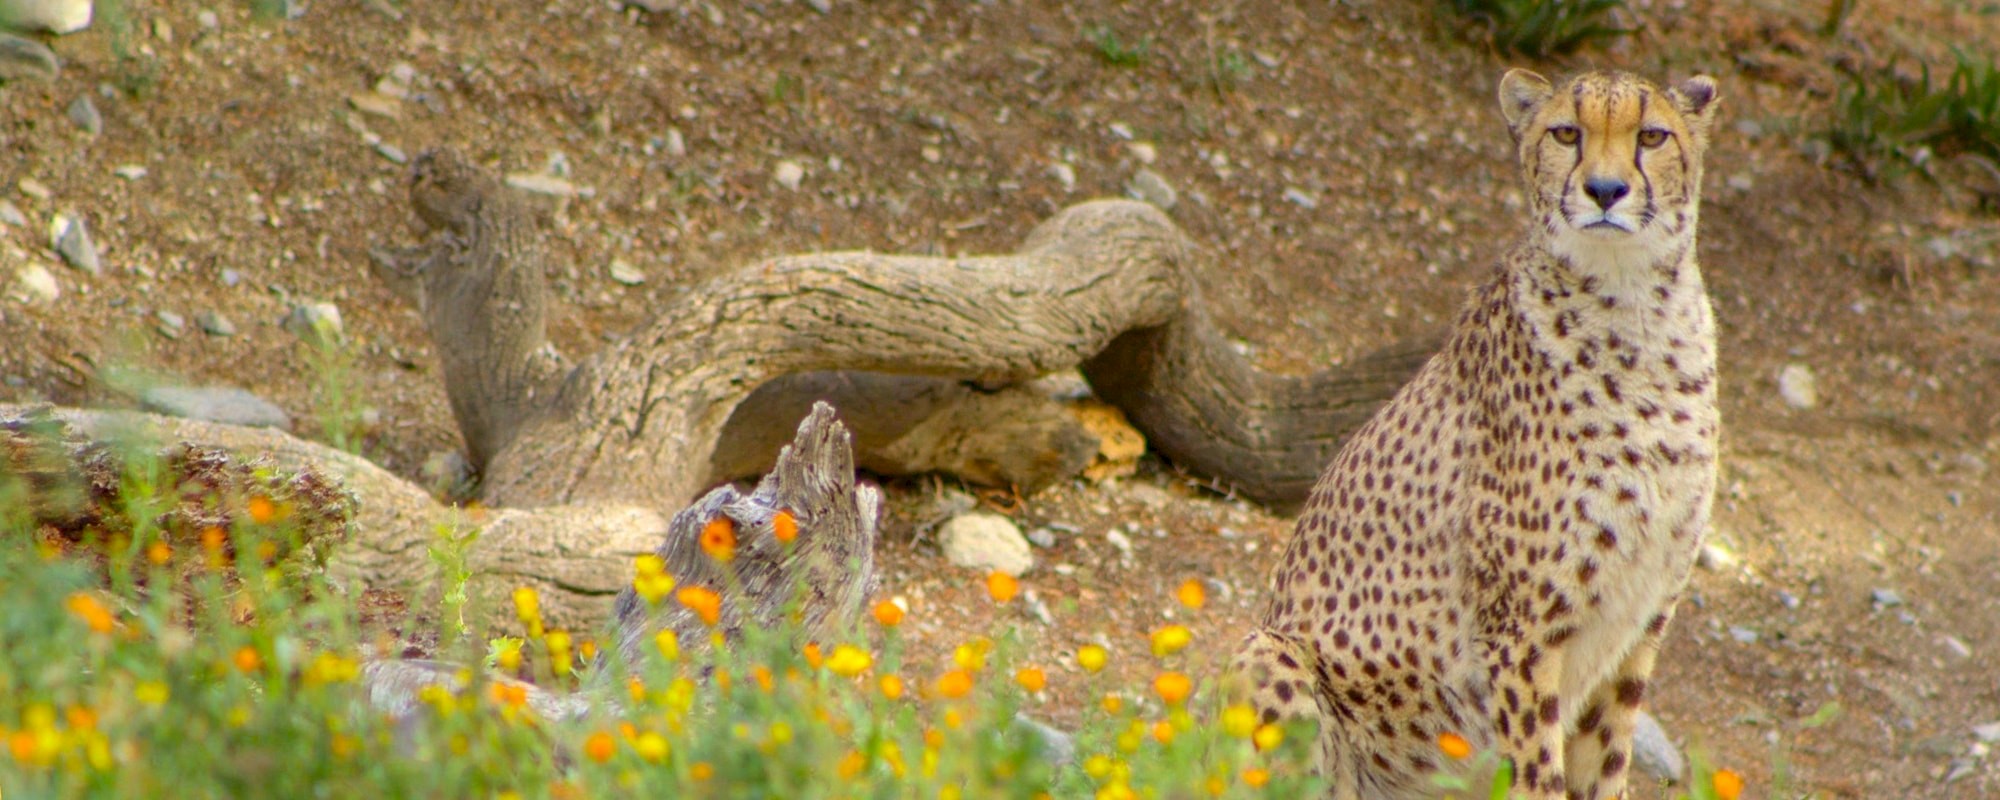 Learn what we're all about at The Living Desert Zoo and Gardens.